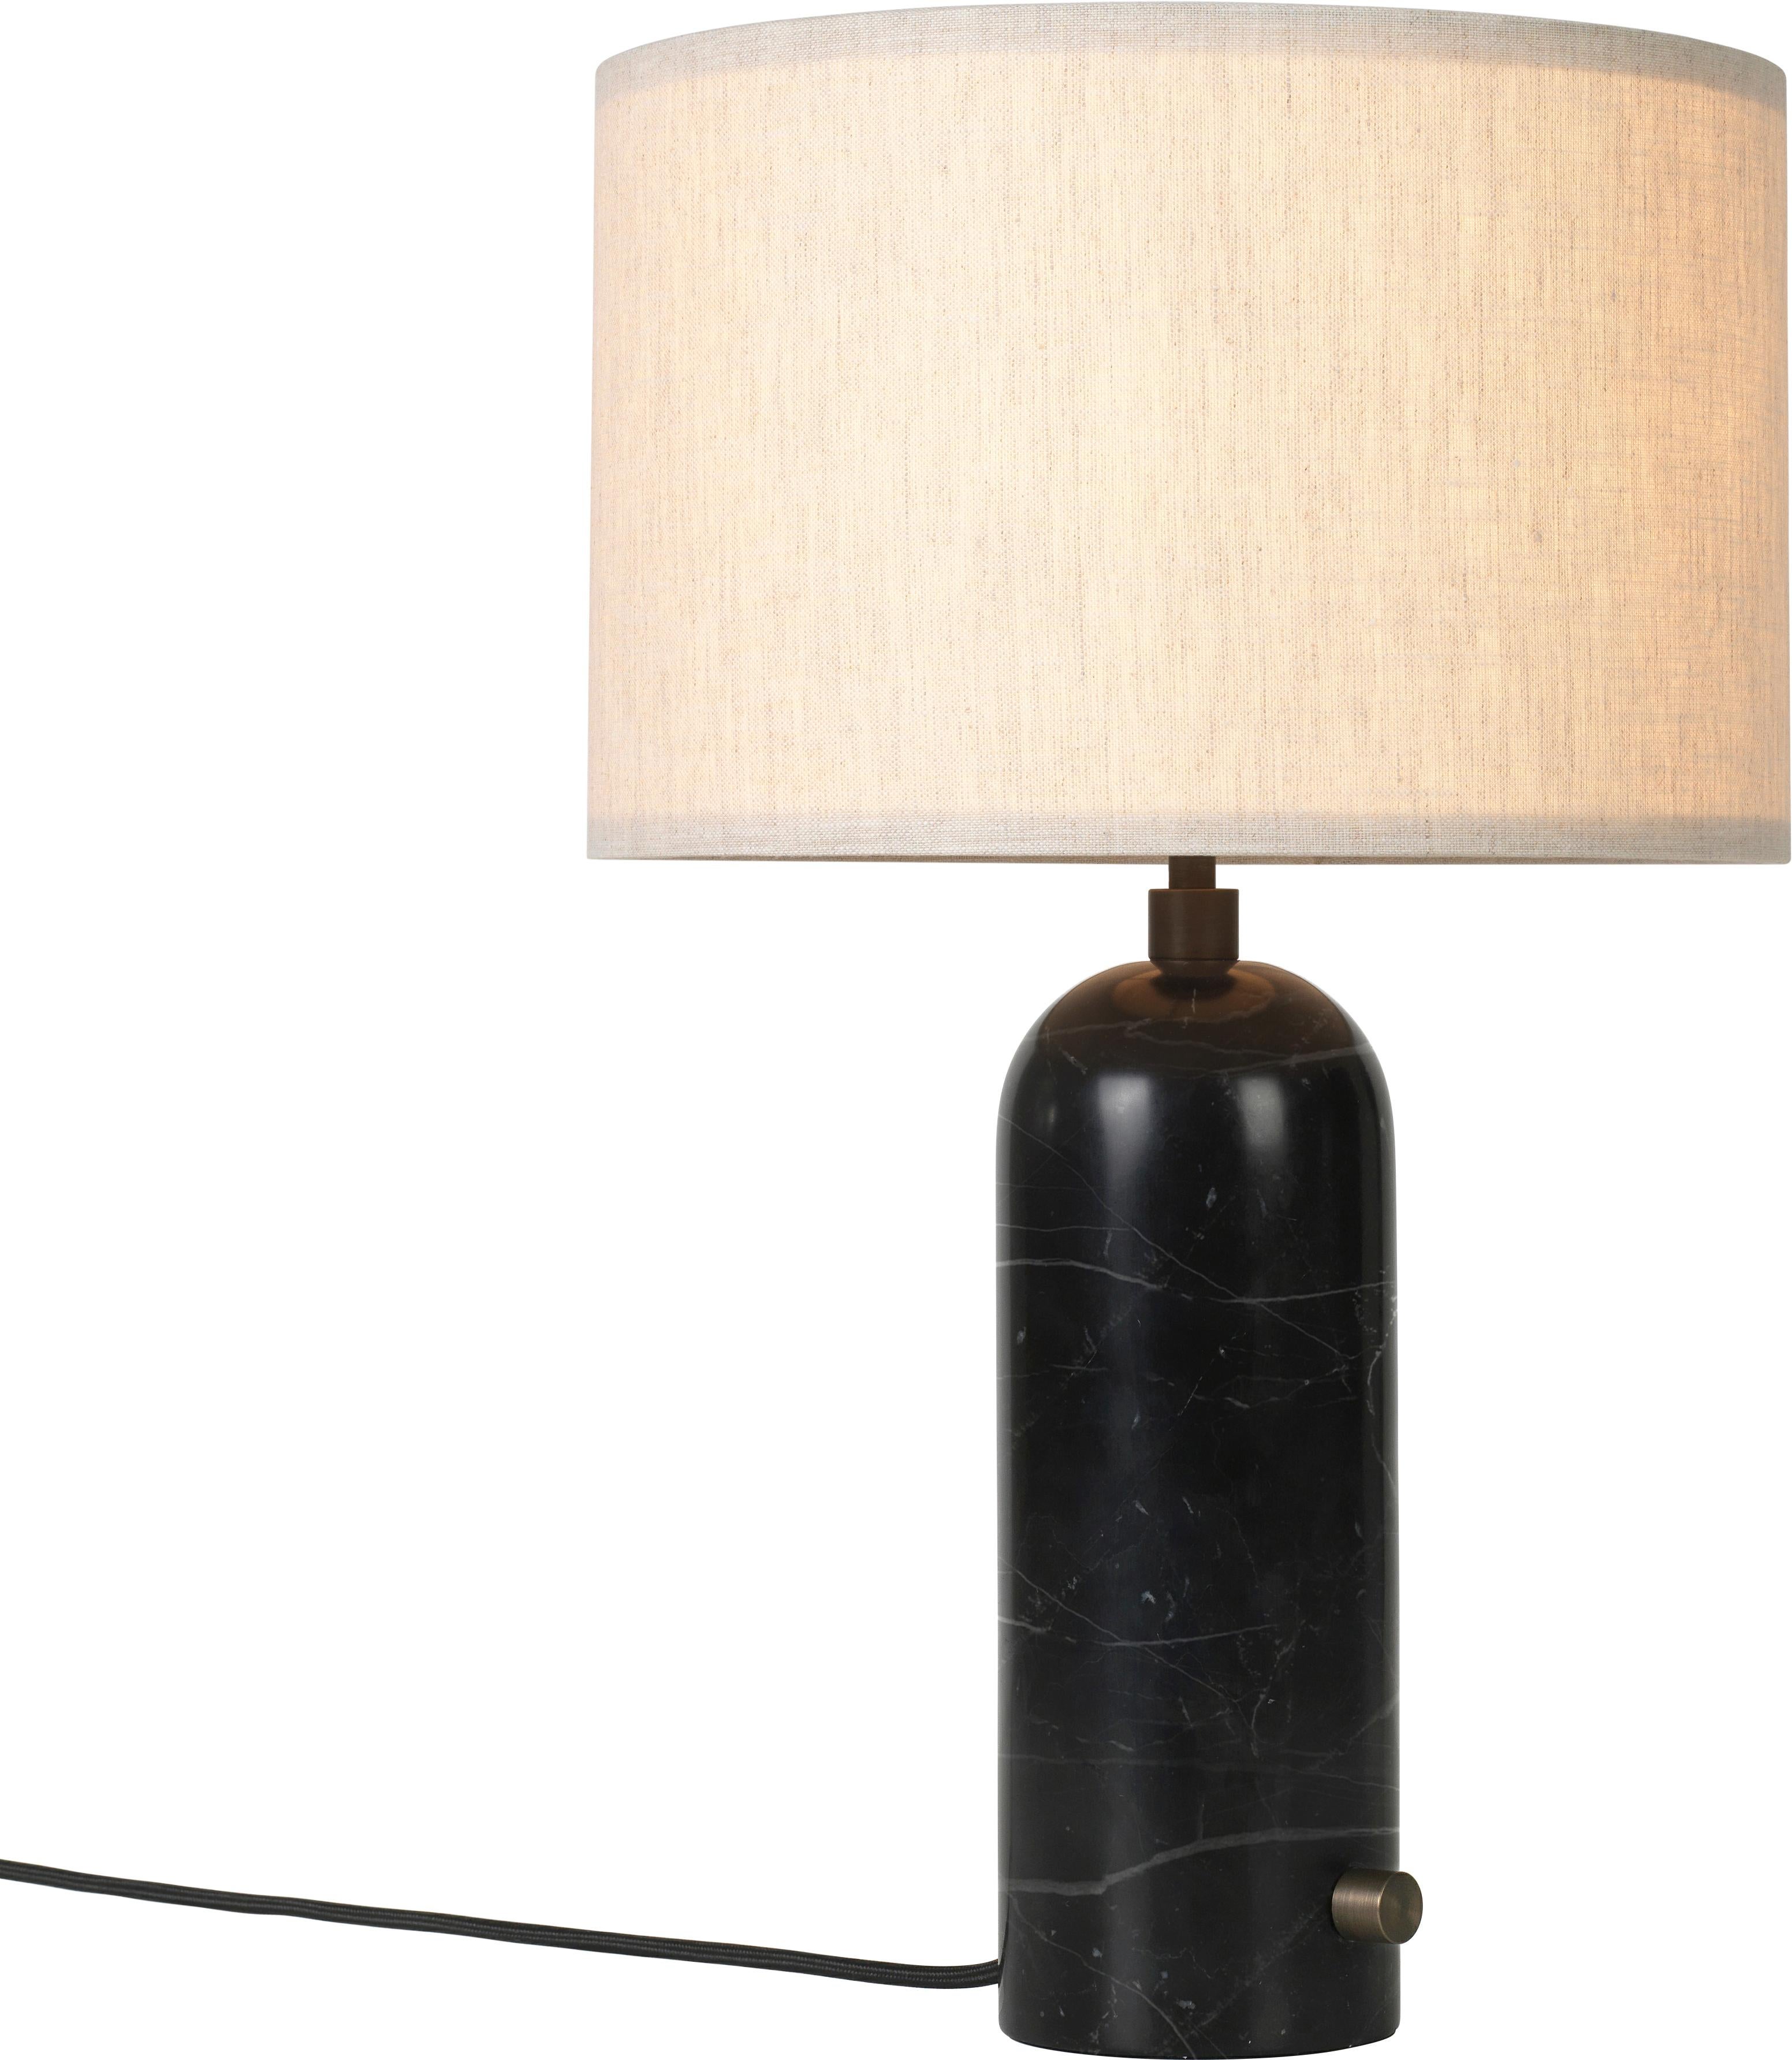 Large 'Gravity' Marble Table Lamp by Space Copenhagen for Gubi in White For Sale 9